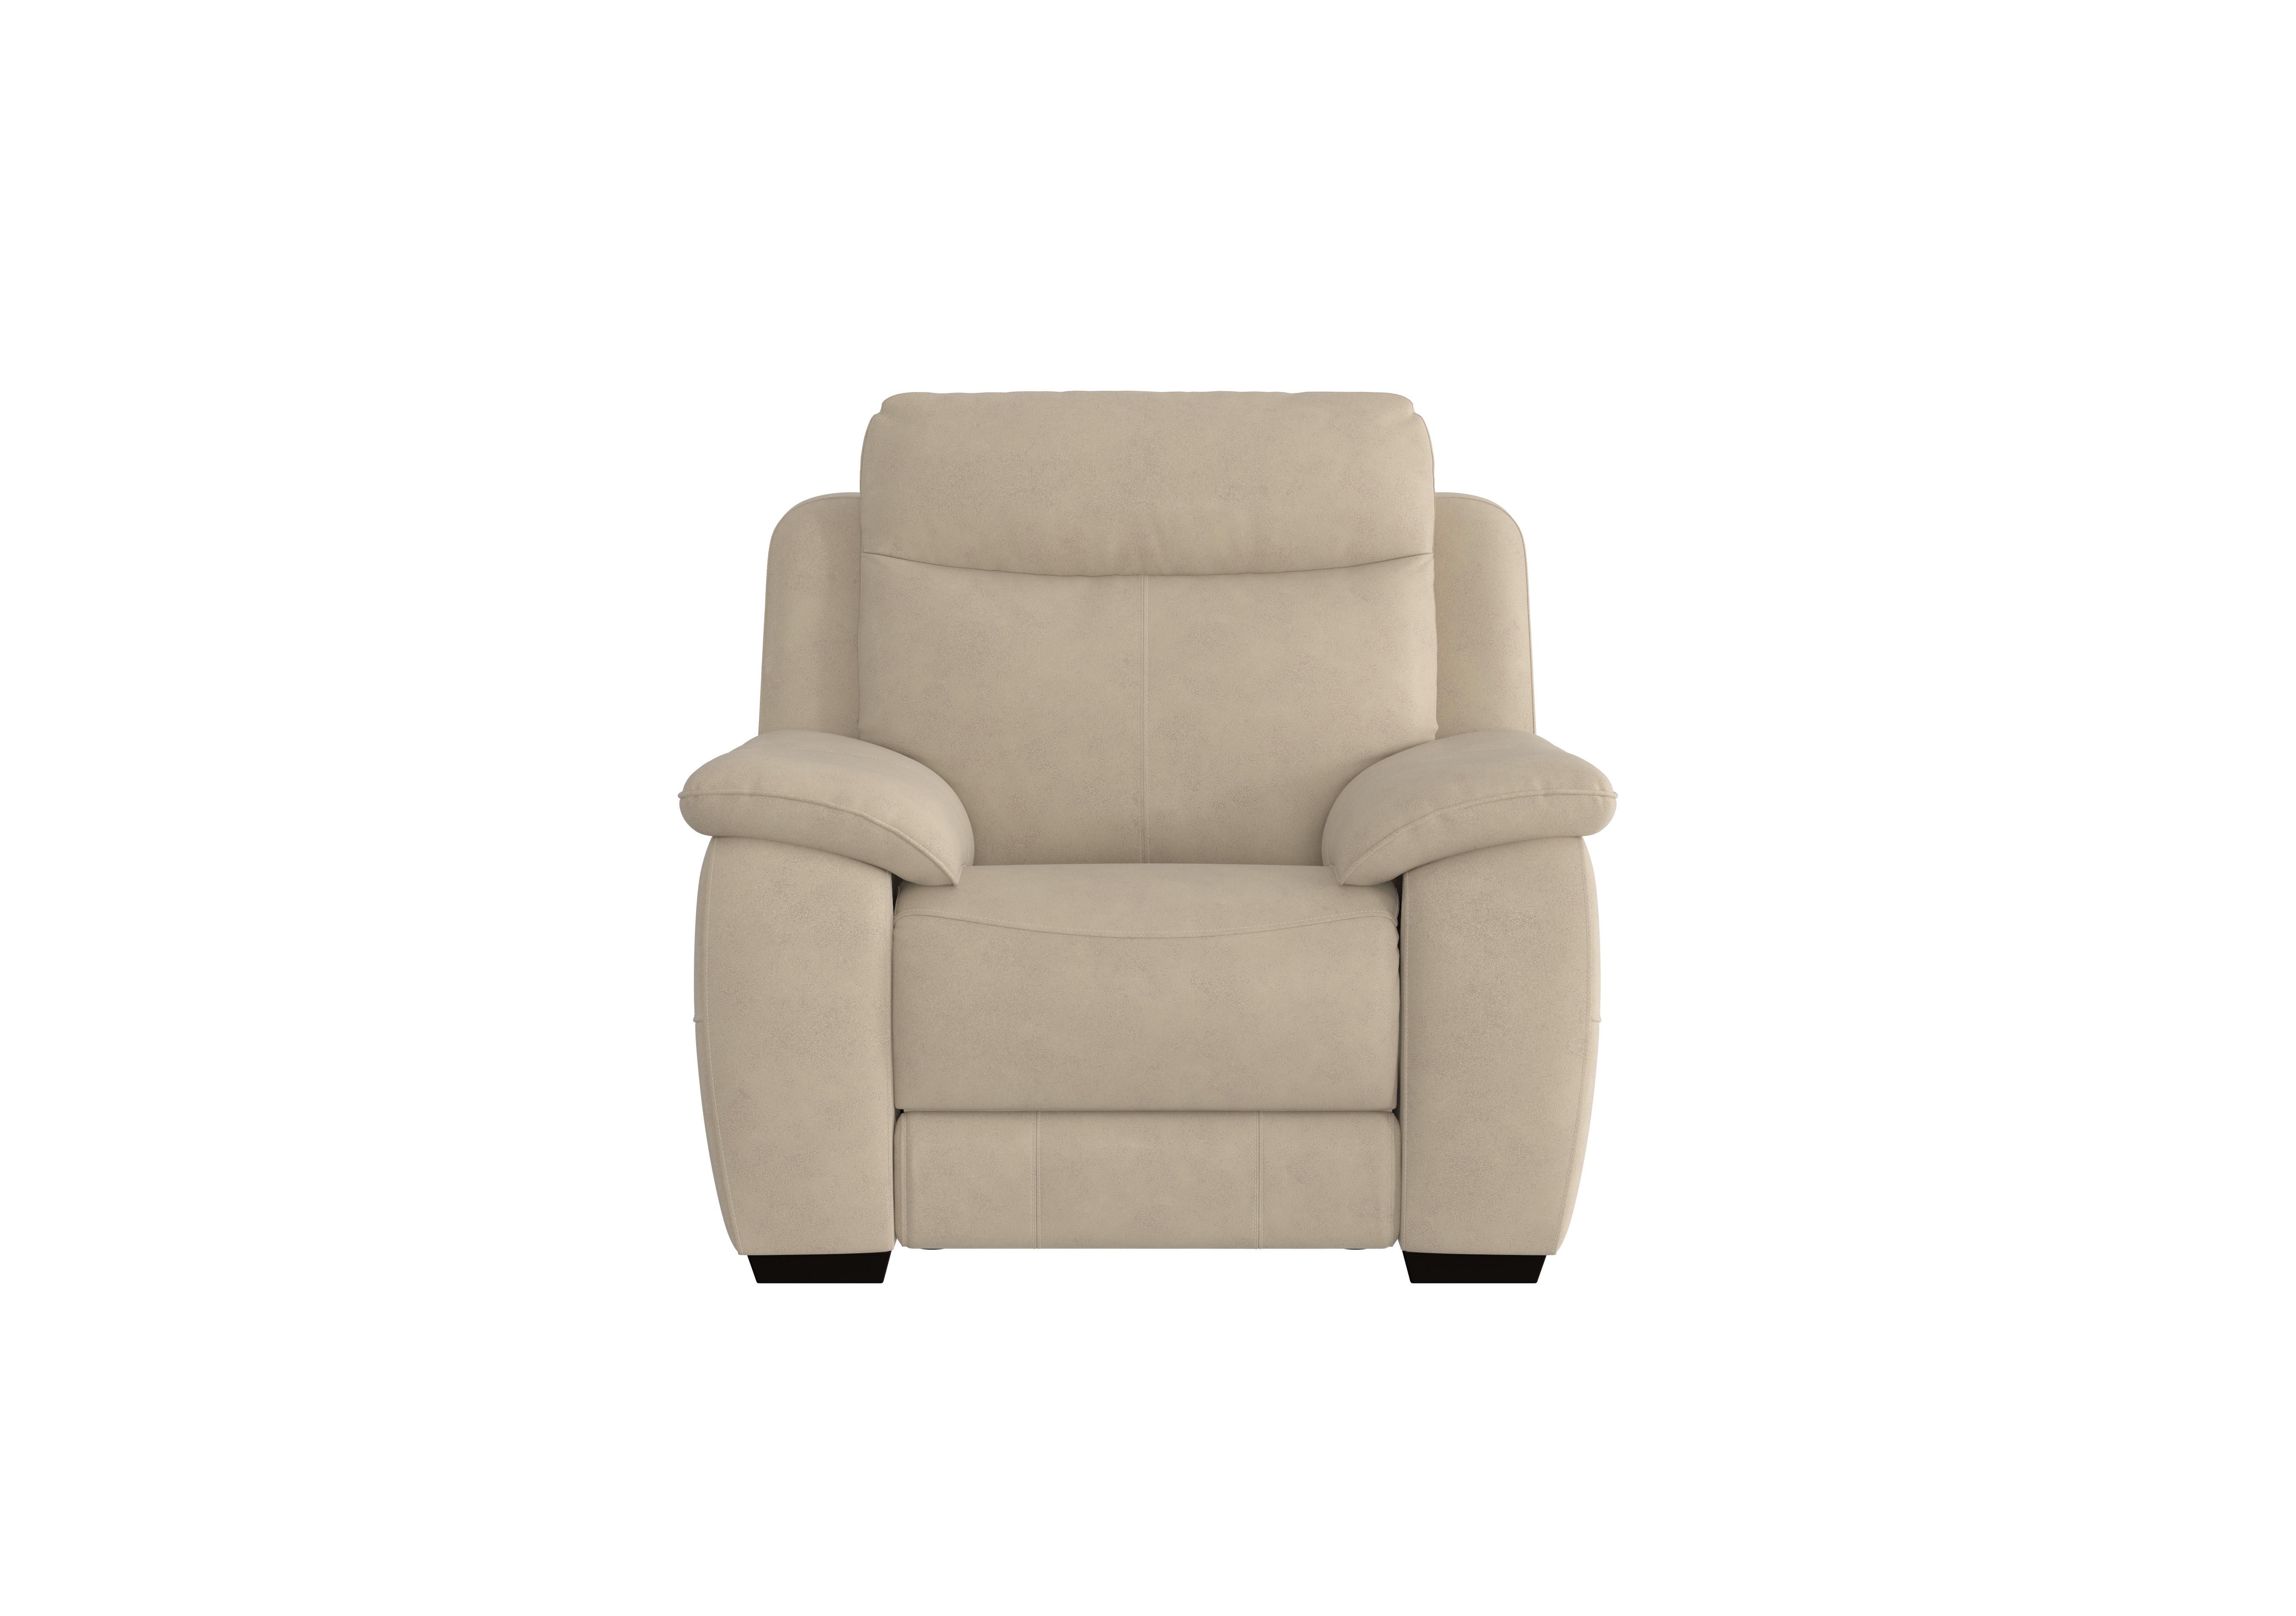 Starlight Express Fabric Power Recliner Armchair with Power Headrest in Bfa-Raf-R20 Oatmeal on Furniture Village